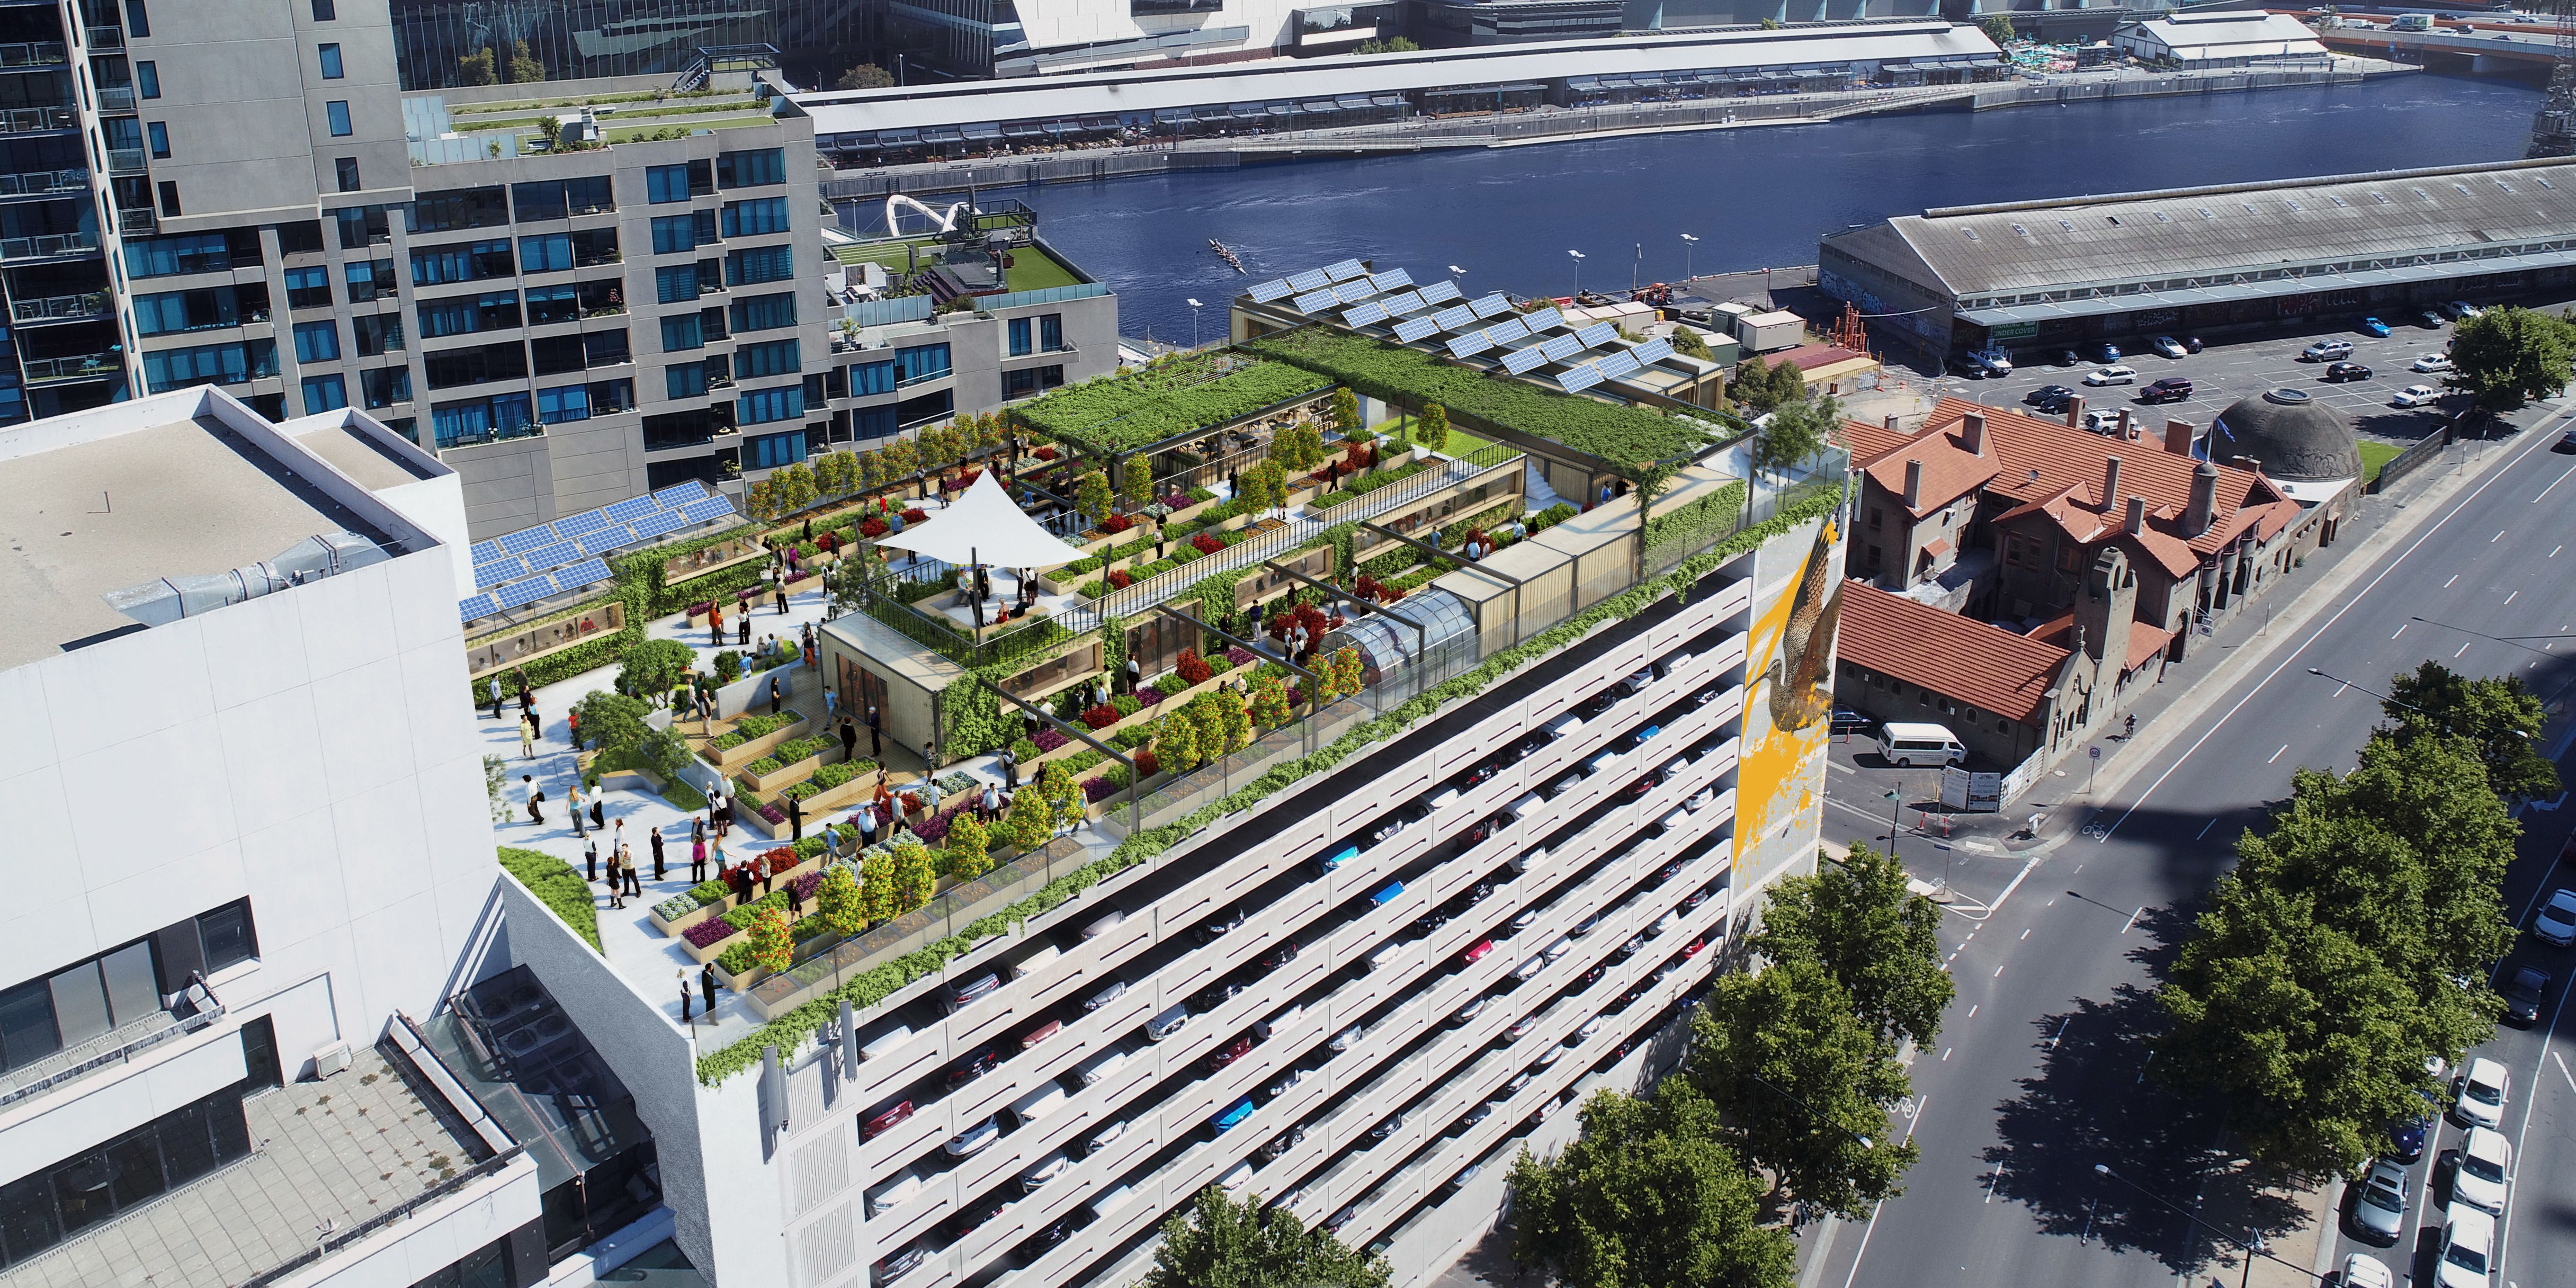 The ugly Melbourne CBD car park about to get a rooftop farm